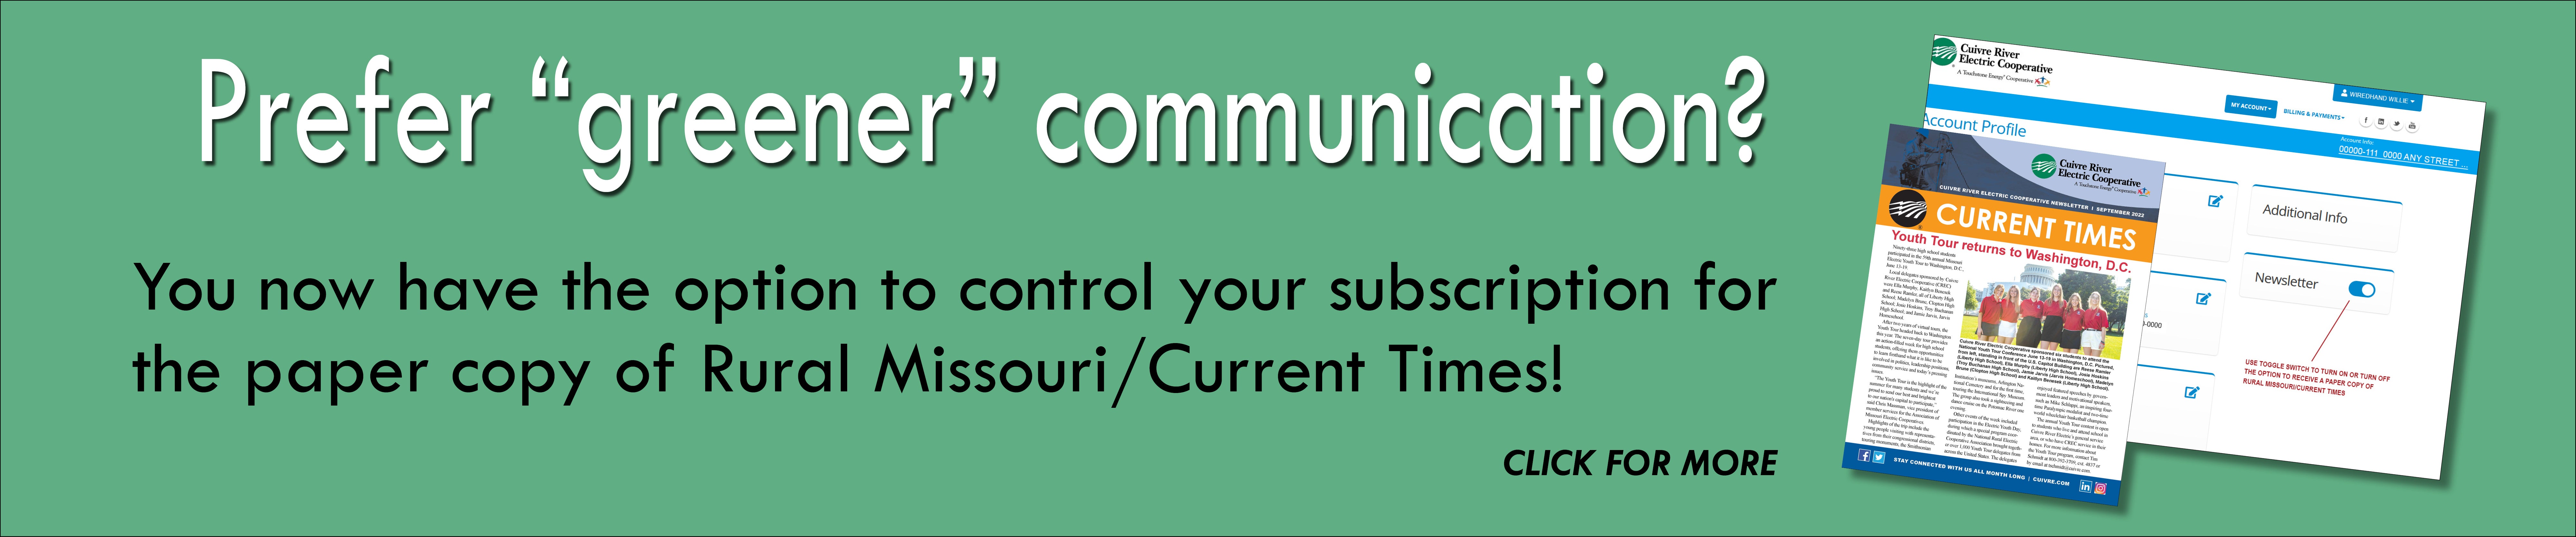 How to unsubscribe from the paper version of Current Times/Rural Missouri